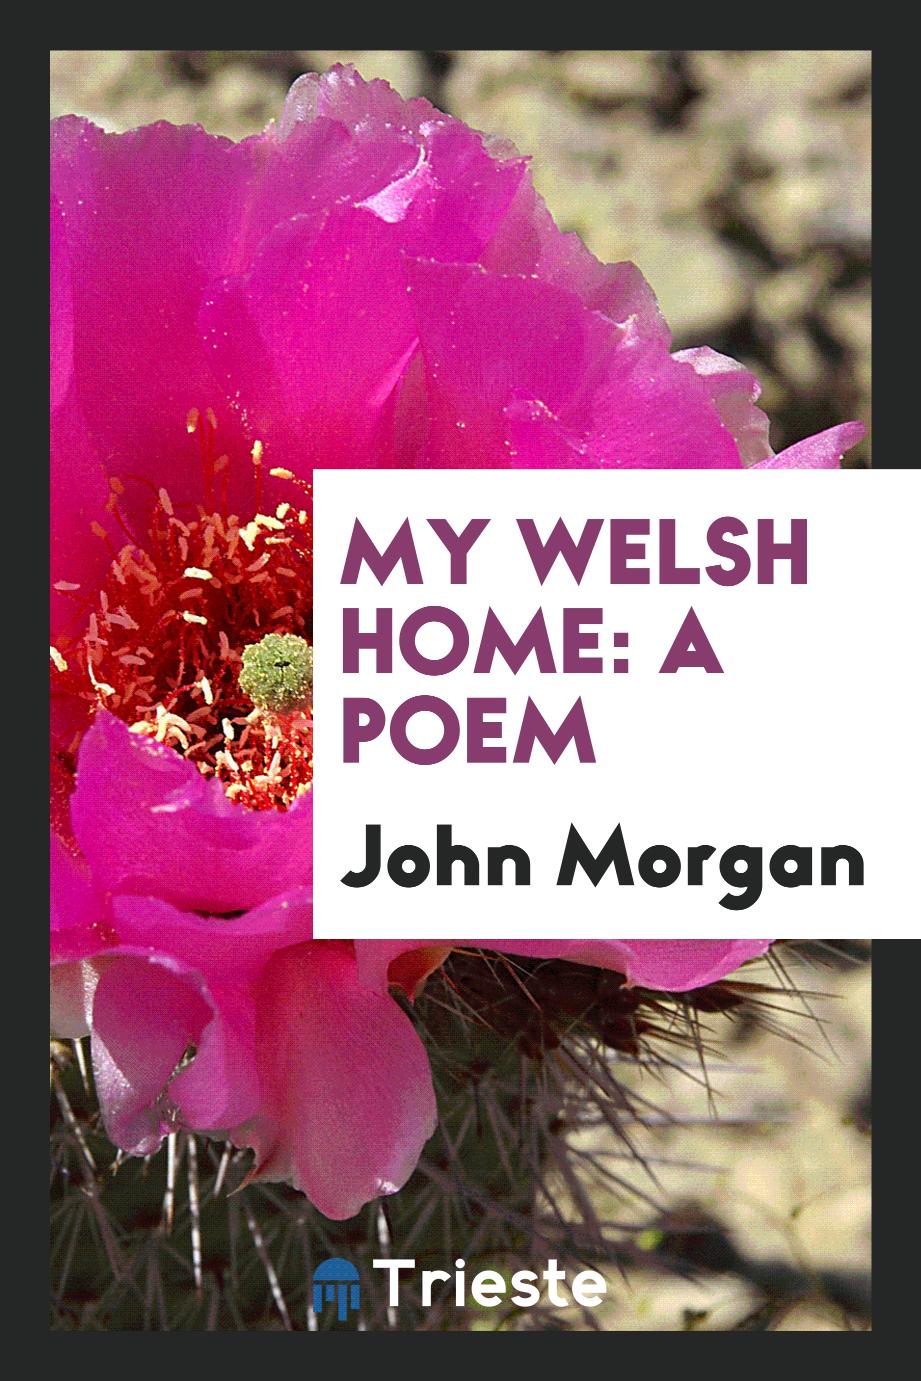 My Welsh Home: A Poem